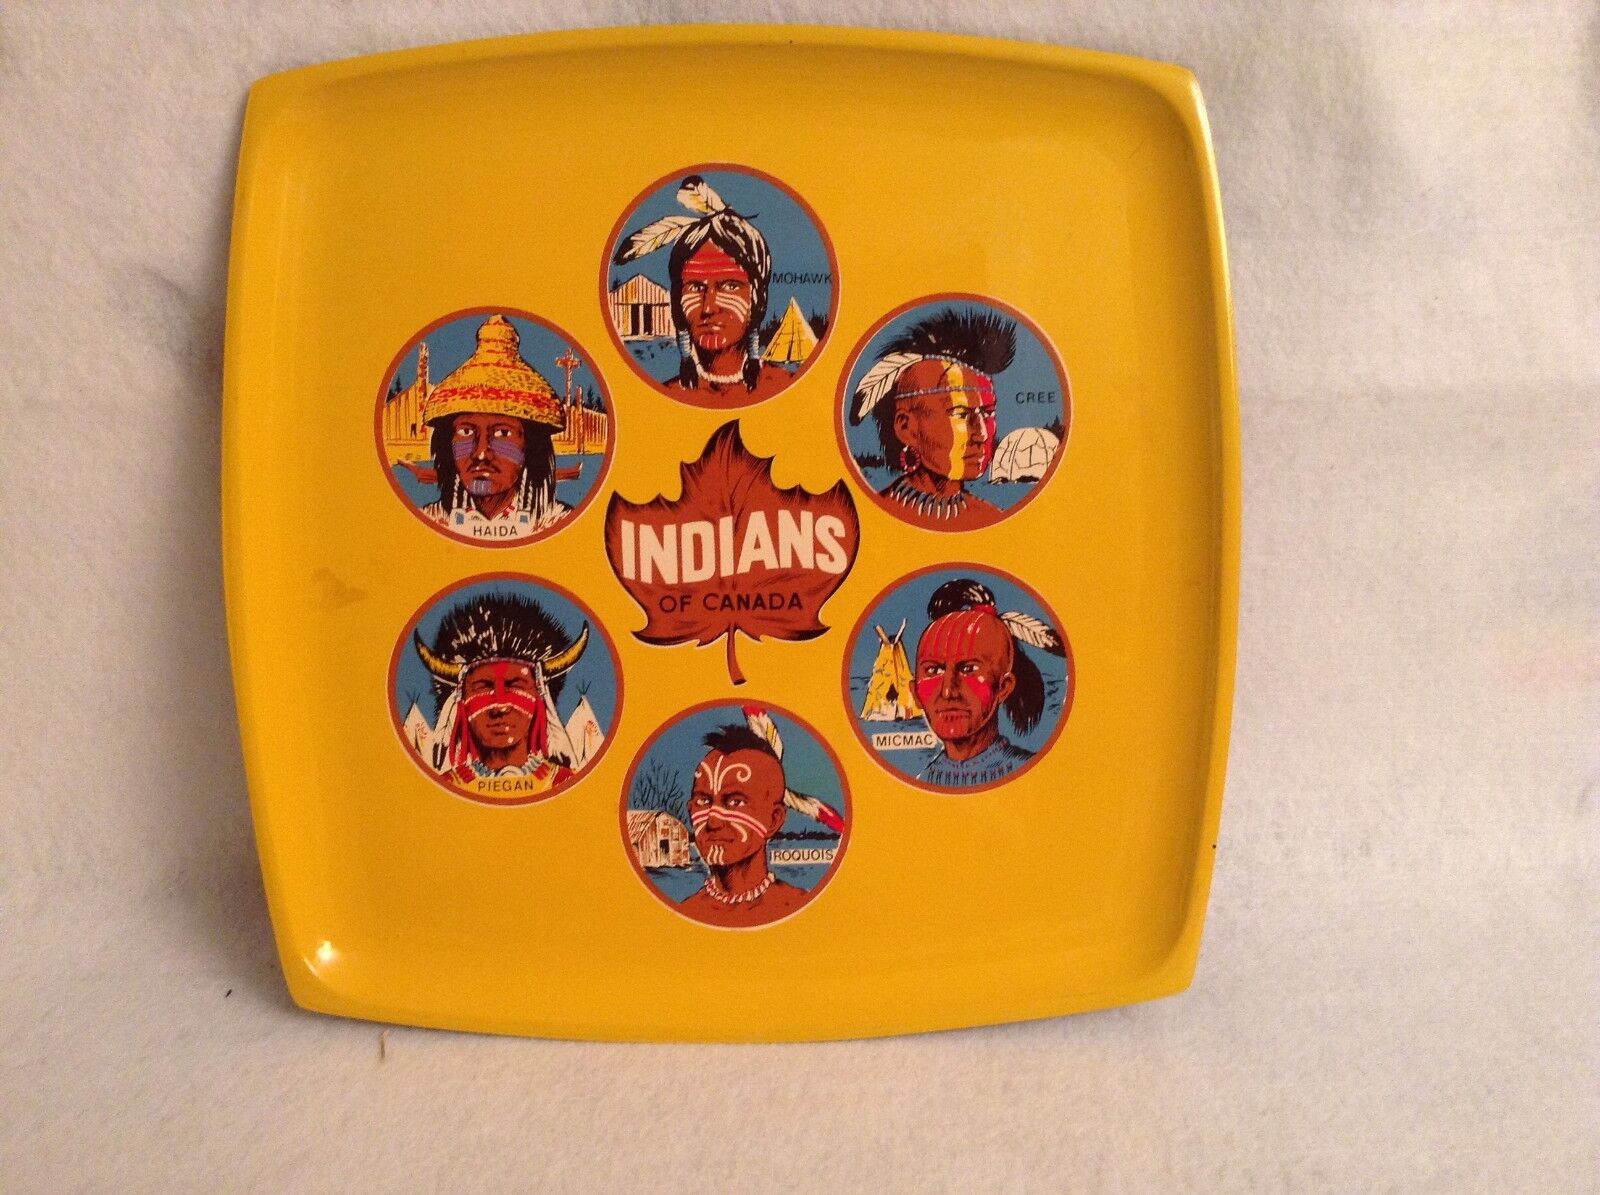 Vintage Indians of Canada Serving Tray Collectible Serveware Home Decor